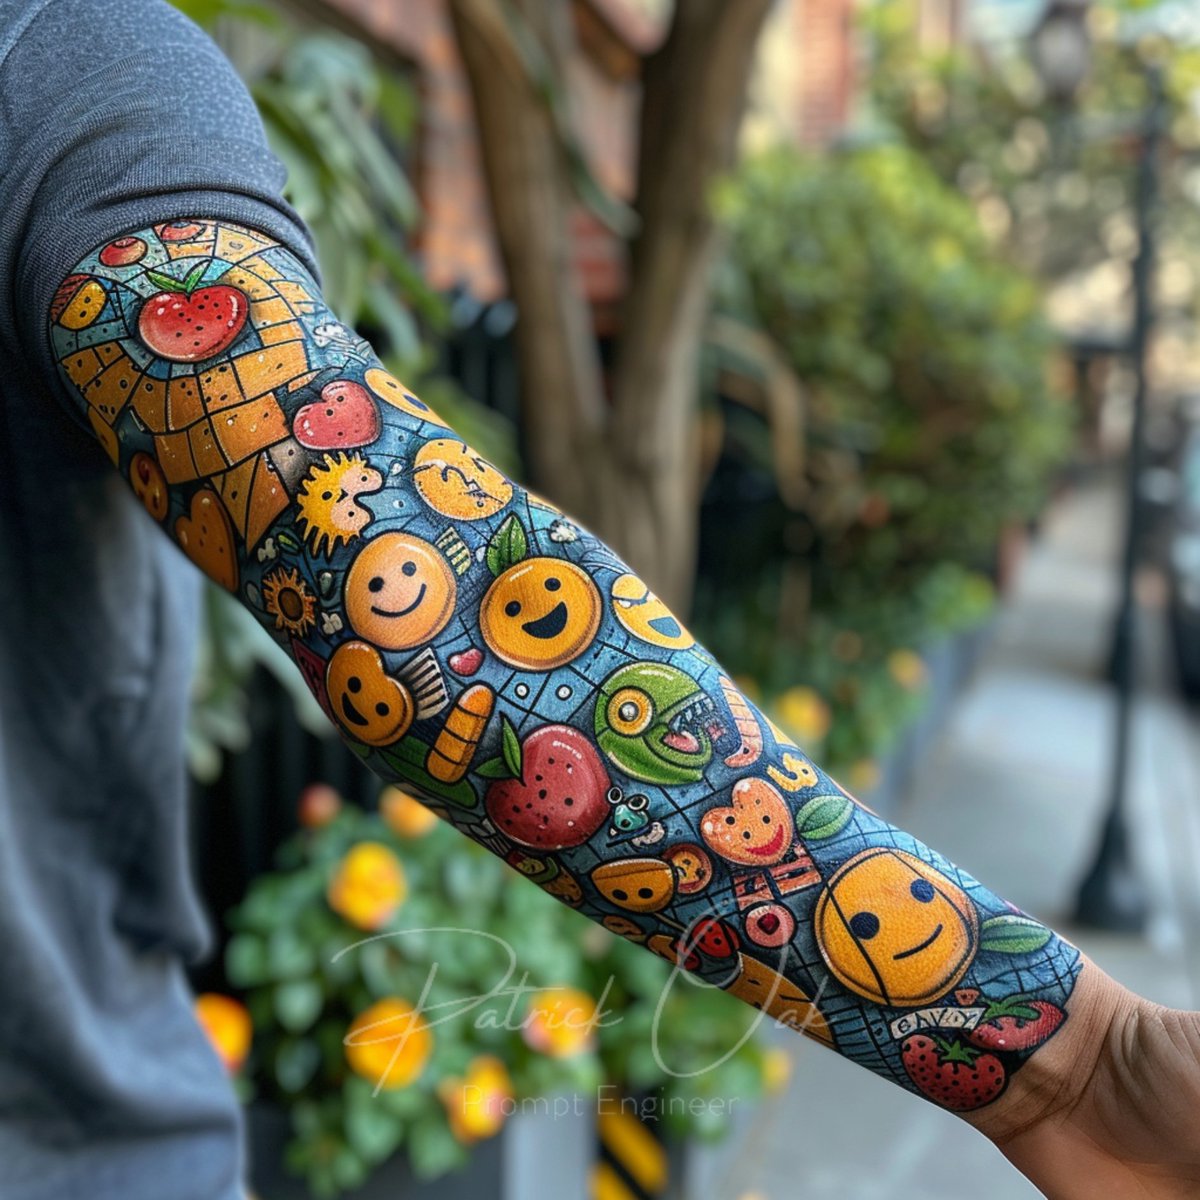 🌈✨ Turn your arm into a vibrant canvas with a full sleeve of colorful emojis! Celebrate creativity, joy, and digital expression in every inked symbol. 🎨💖 #EmojiTattoo #ColorfulInk #TattooArt #DigitalExpression #PlayfulInk #VibrantTattoos #CreativeTattoos